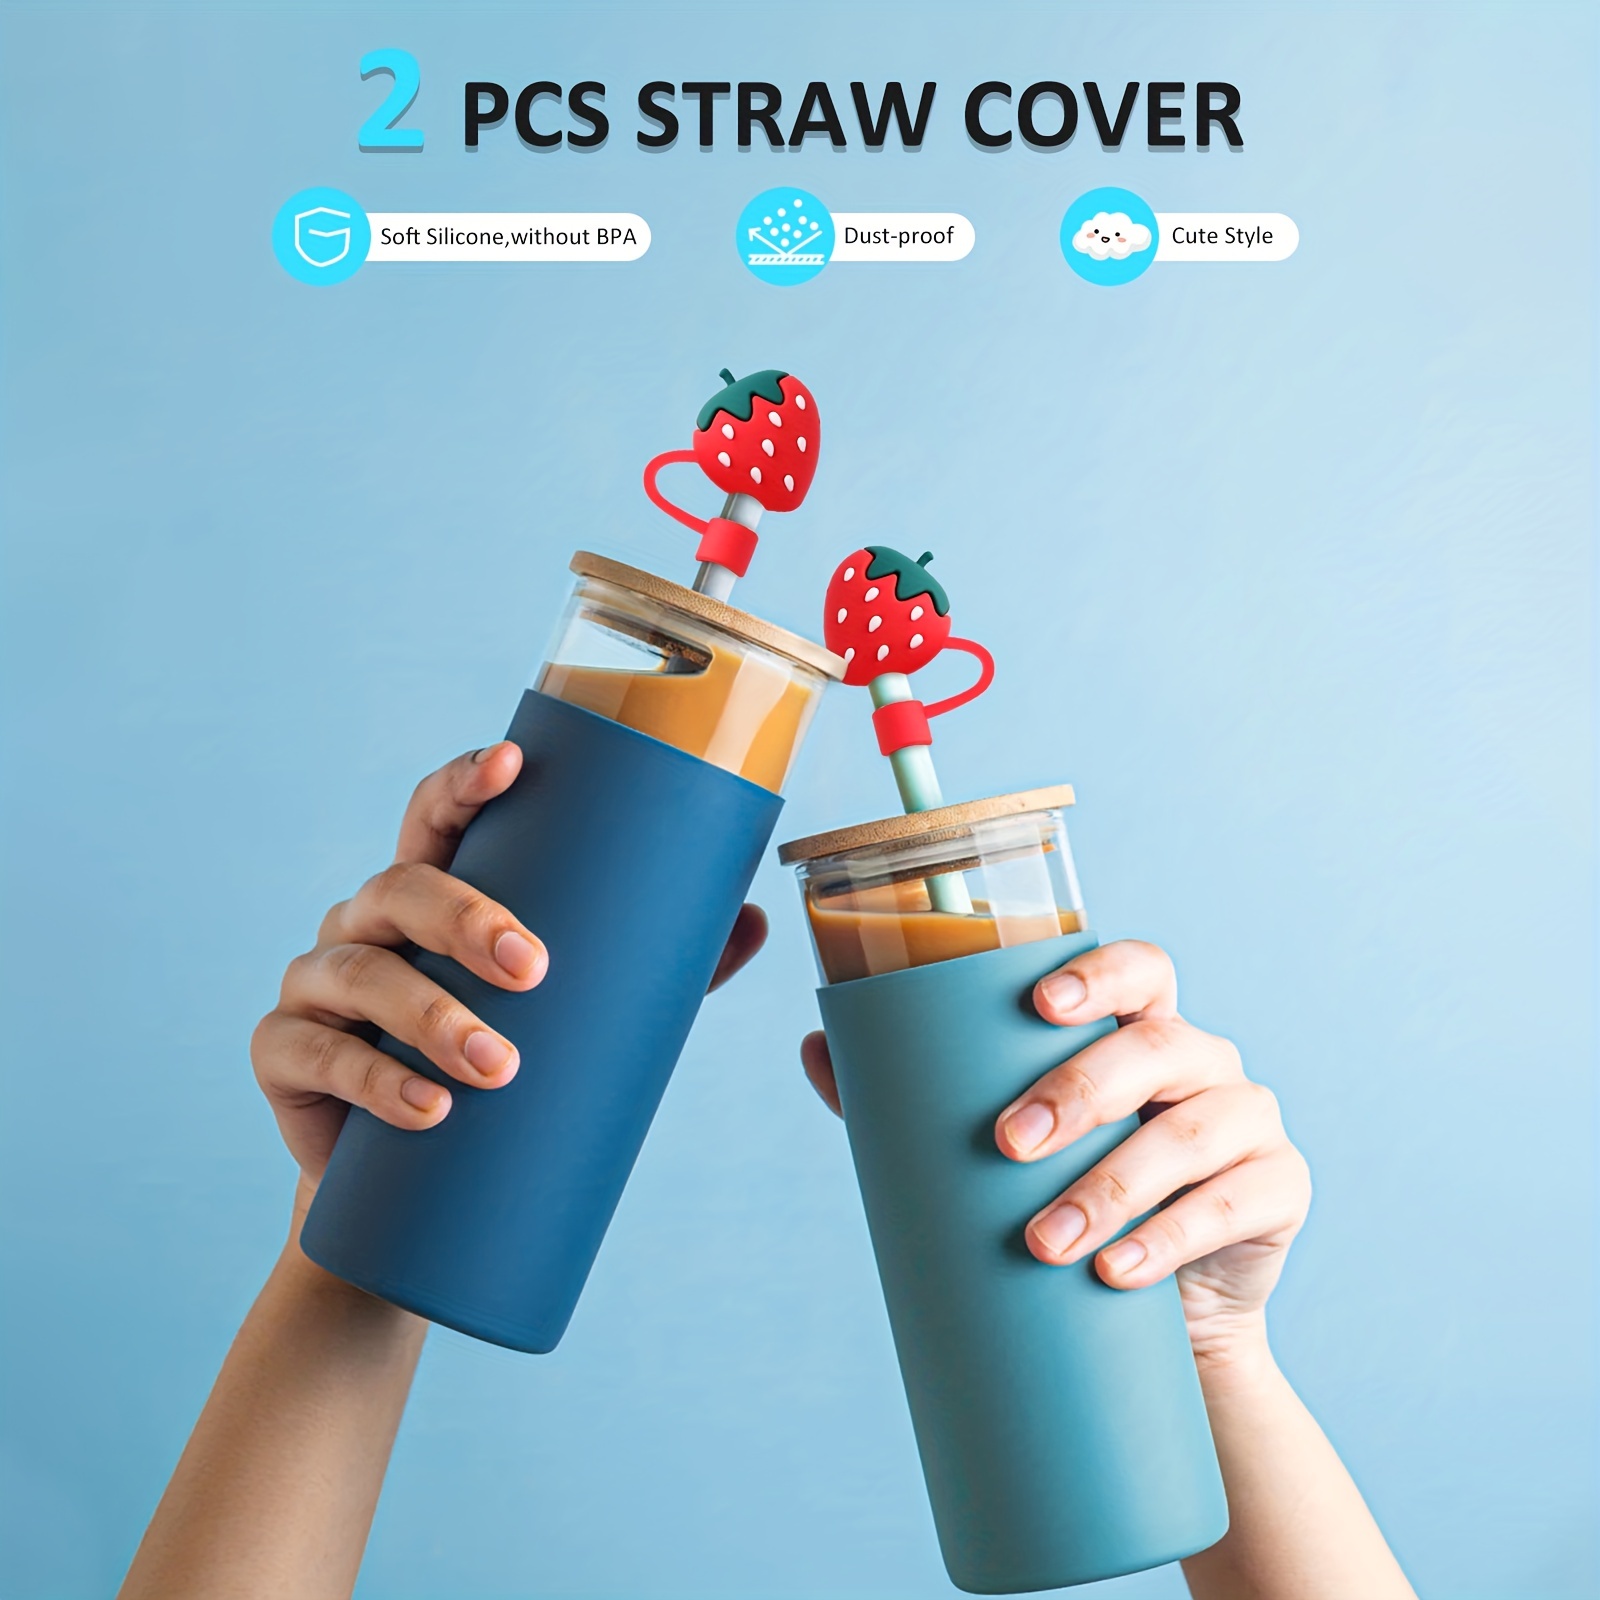 2pcs Silicone Straw Covers Cap Reusable Drinking Straw Tips Lids Cute Straw Topper for Reusable Straws